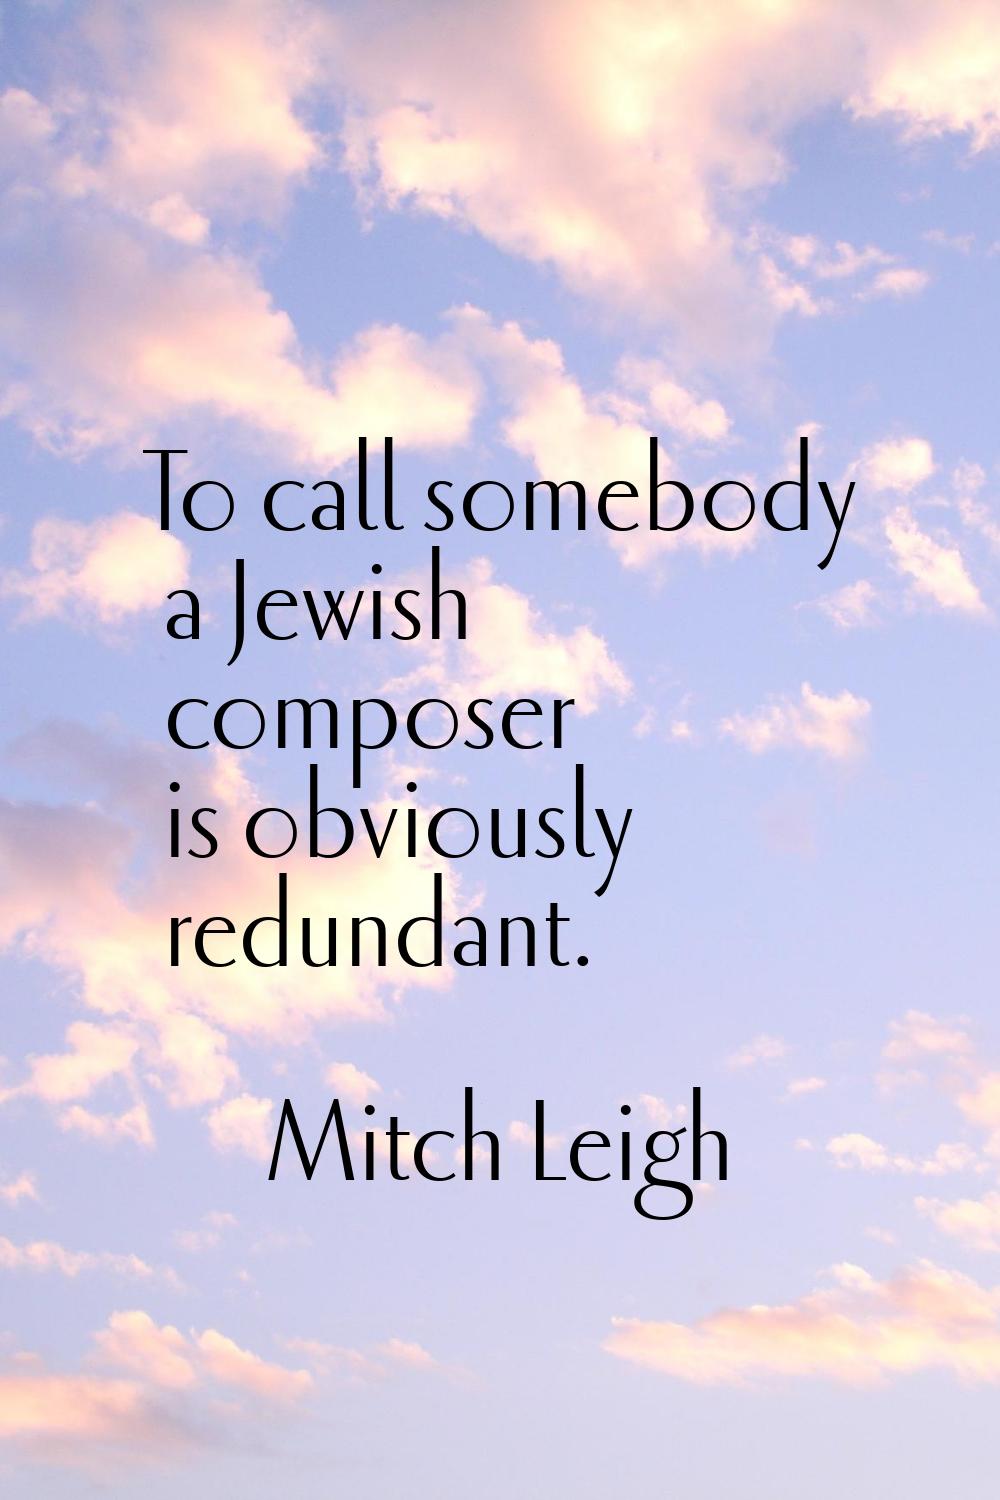 To call somebody a Jewish composer is obviously redundant.